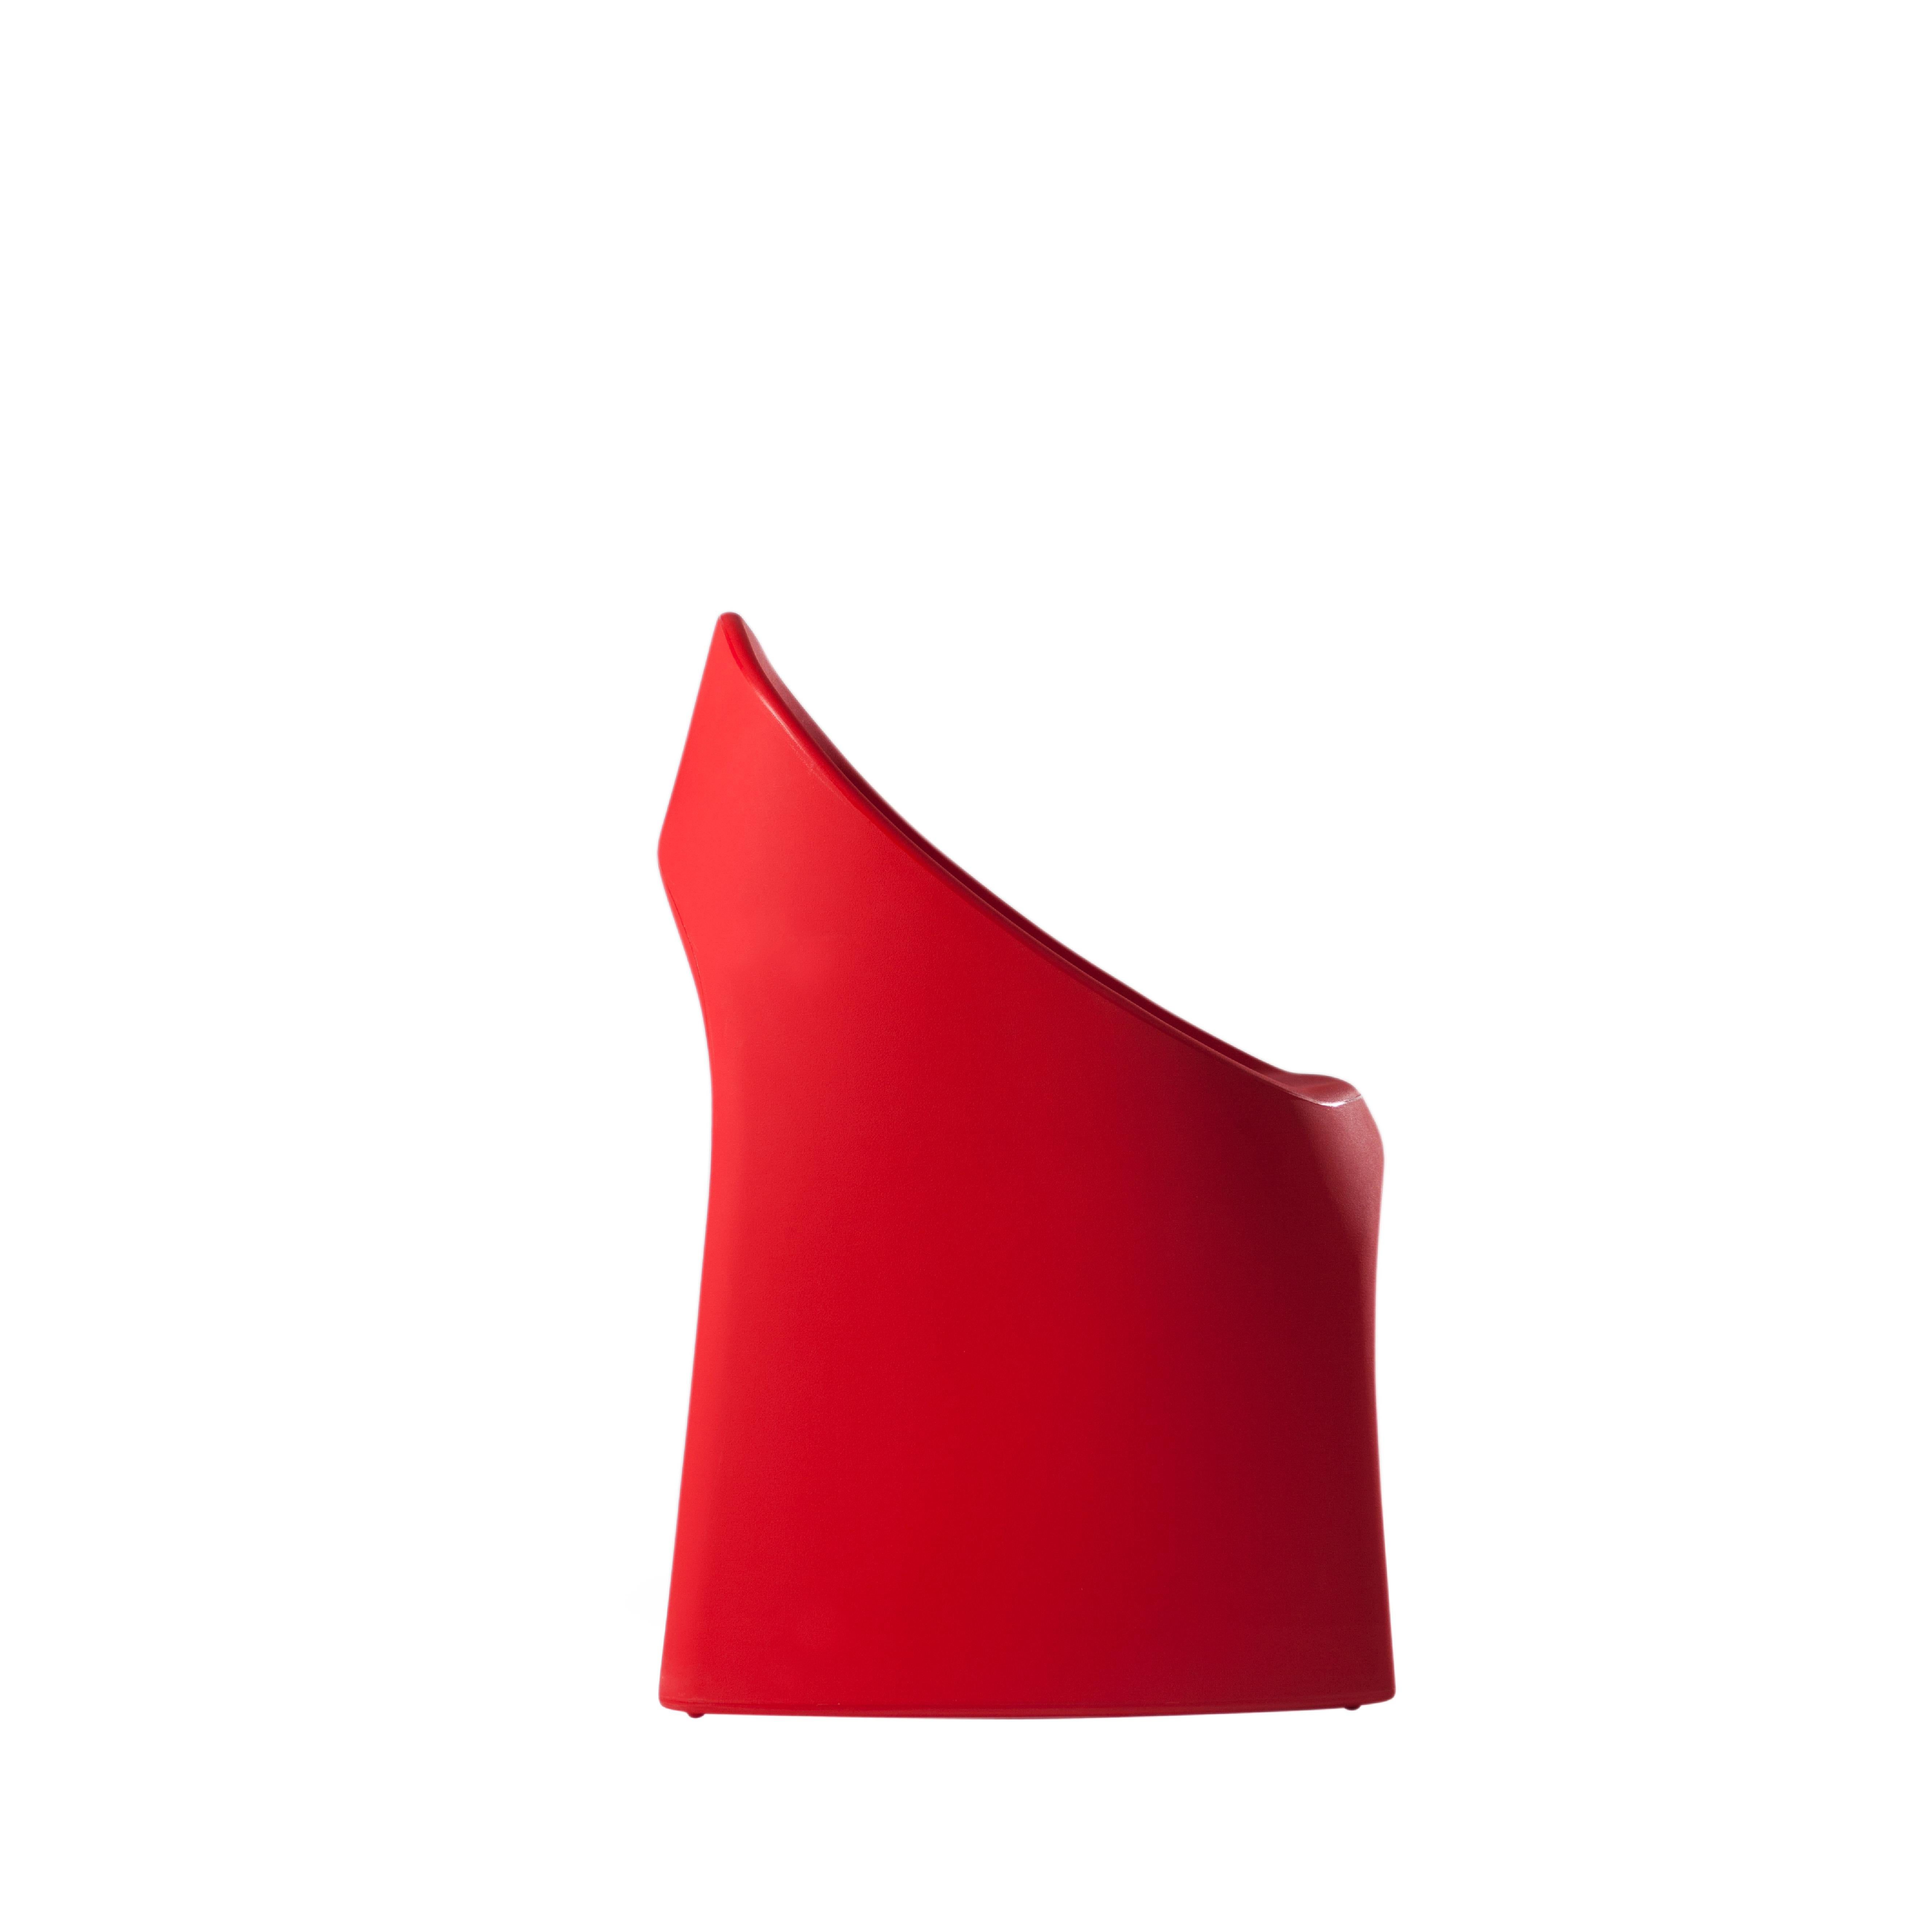 Italian Slide Design Amélie Chair in Flame Red by Italo Pertichini For Sale